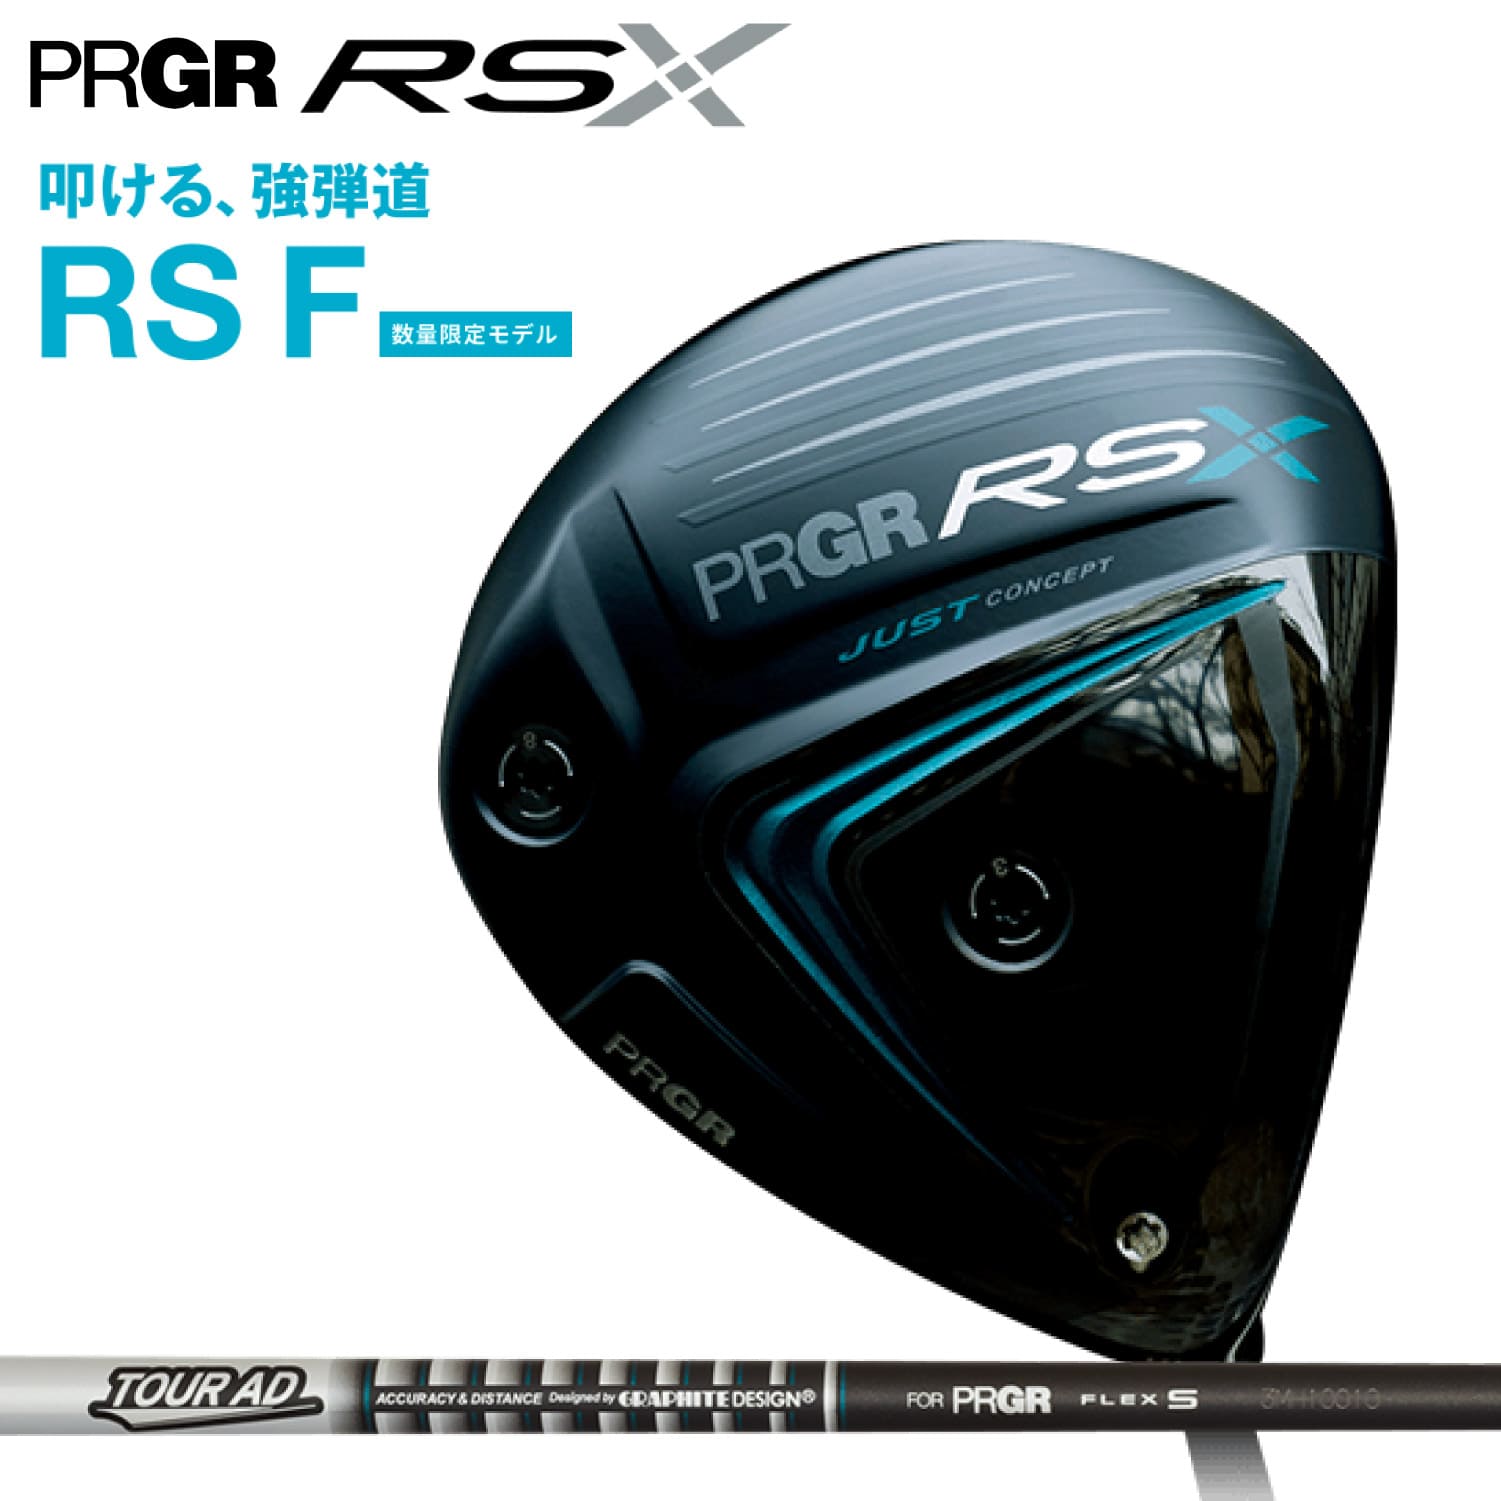 PRGR RS X DRIVER RS F TOUR AD FOR PRGR